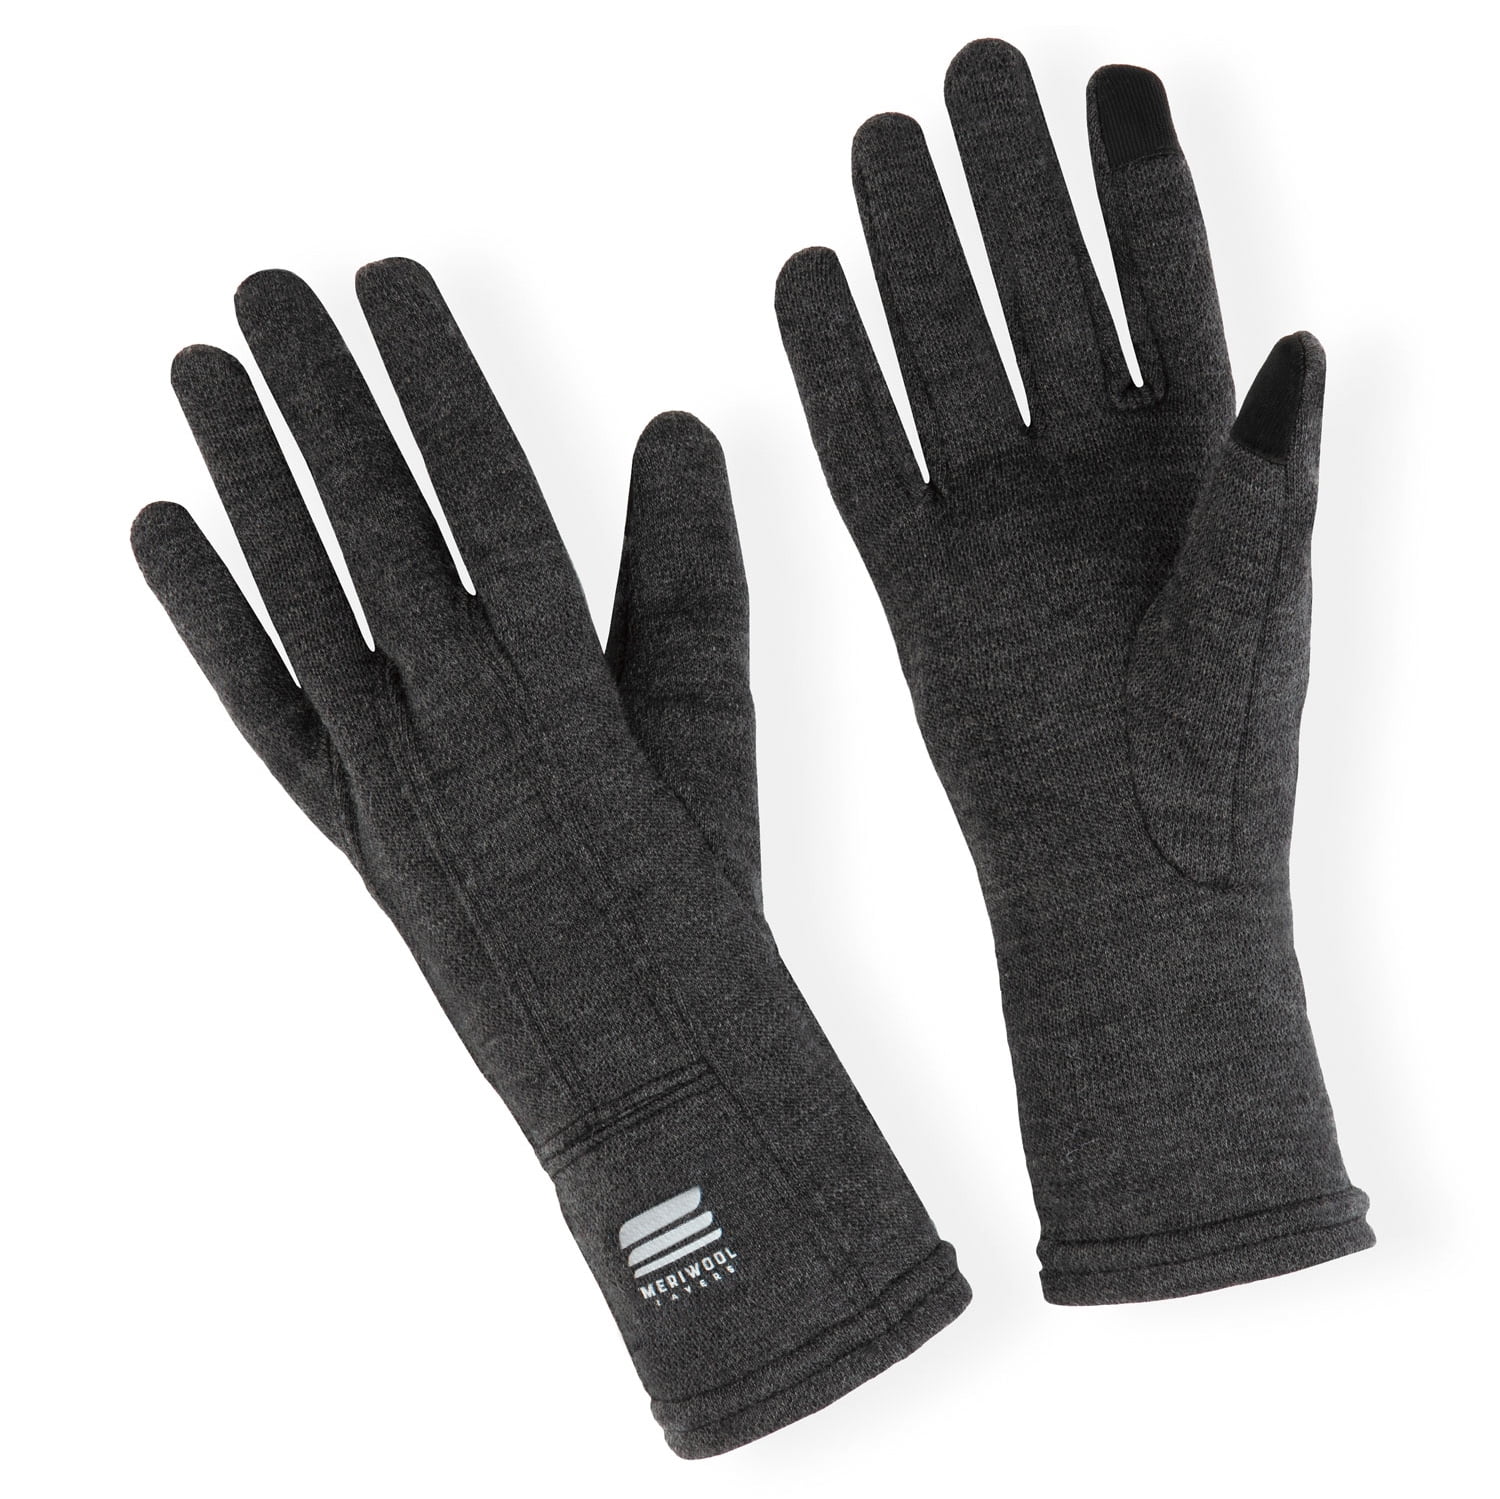 MERIWOOL Merino Wool Unisex Glove Liners for use with Touch Screens in  Charcoal Gray - Small 